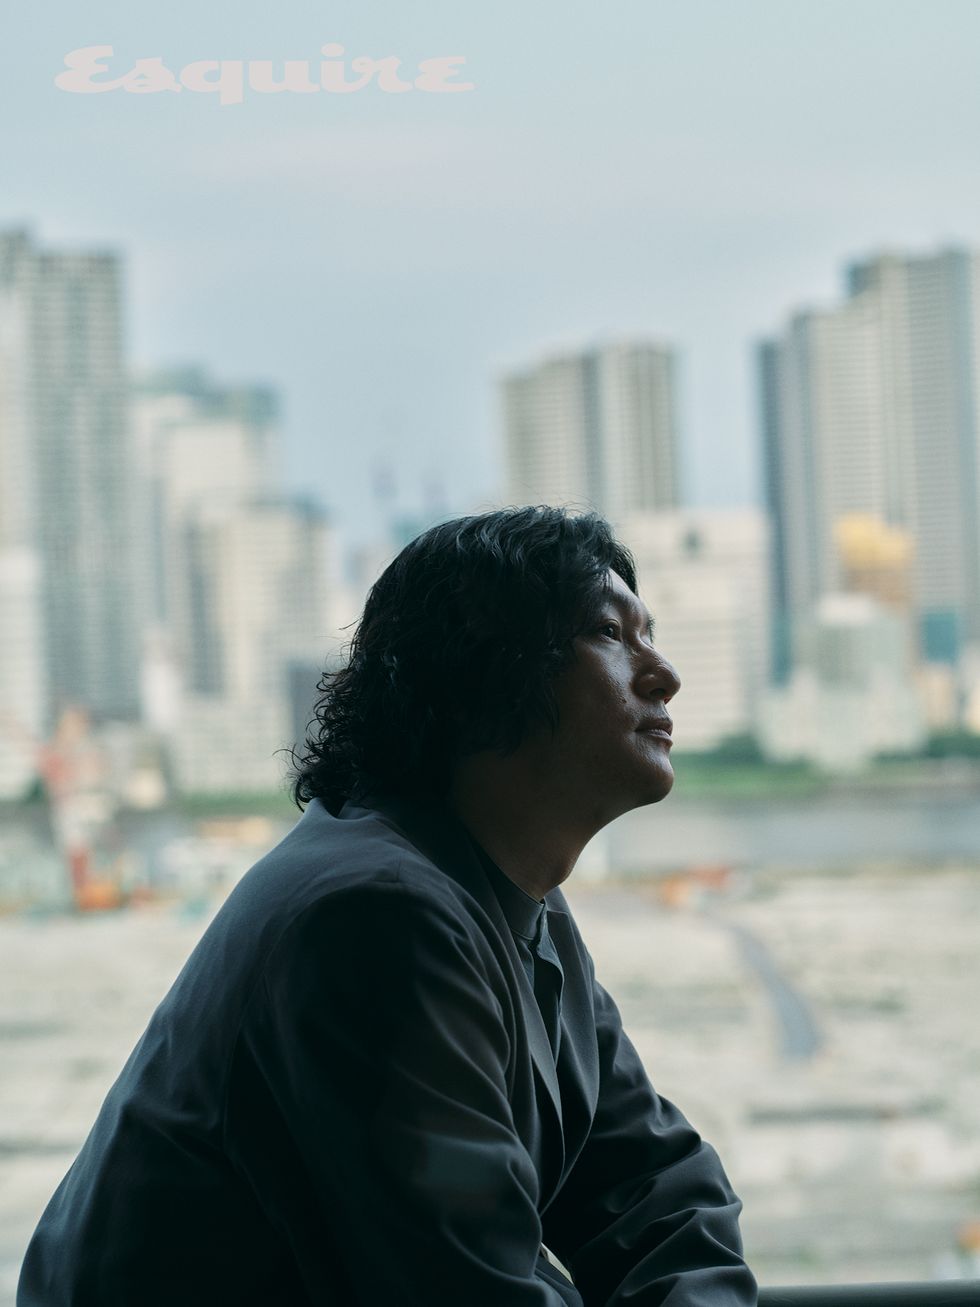 actor　iura arata with a city in the background